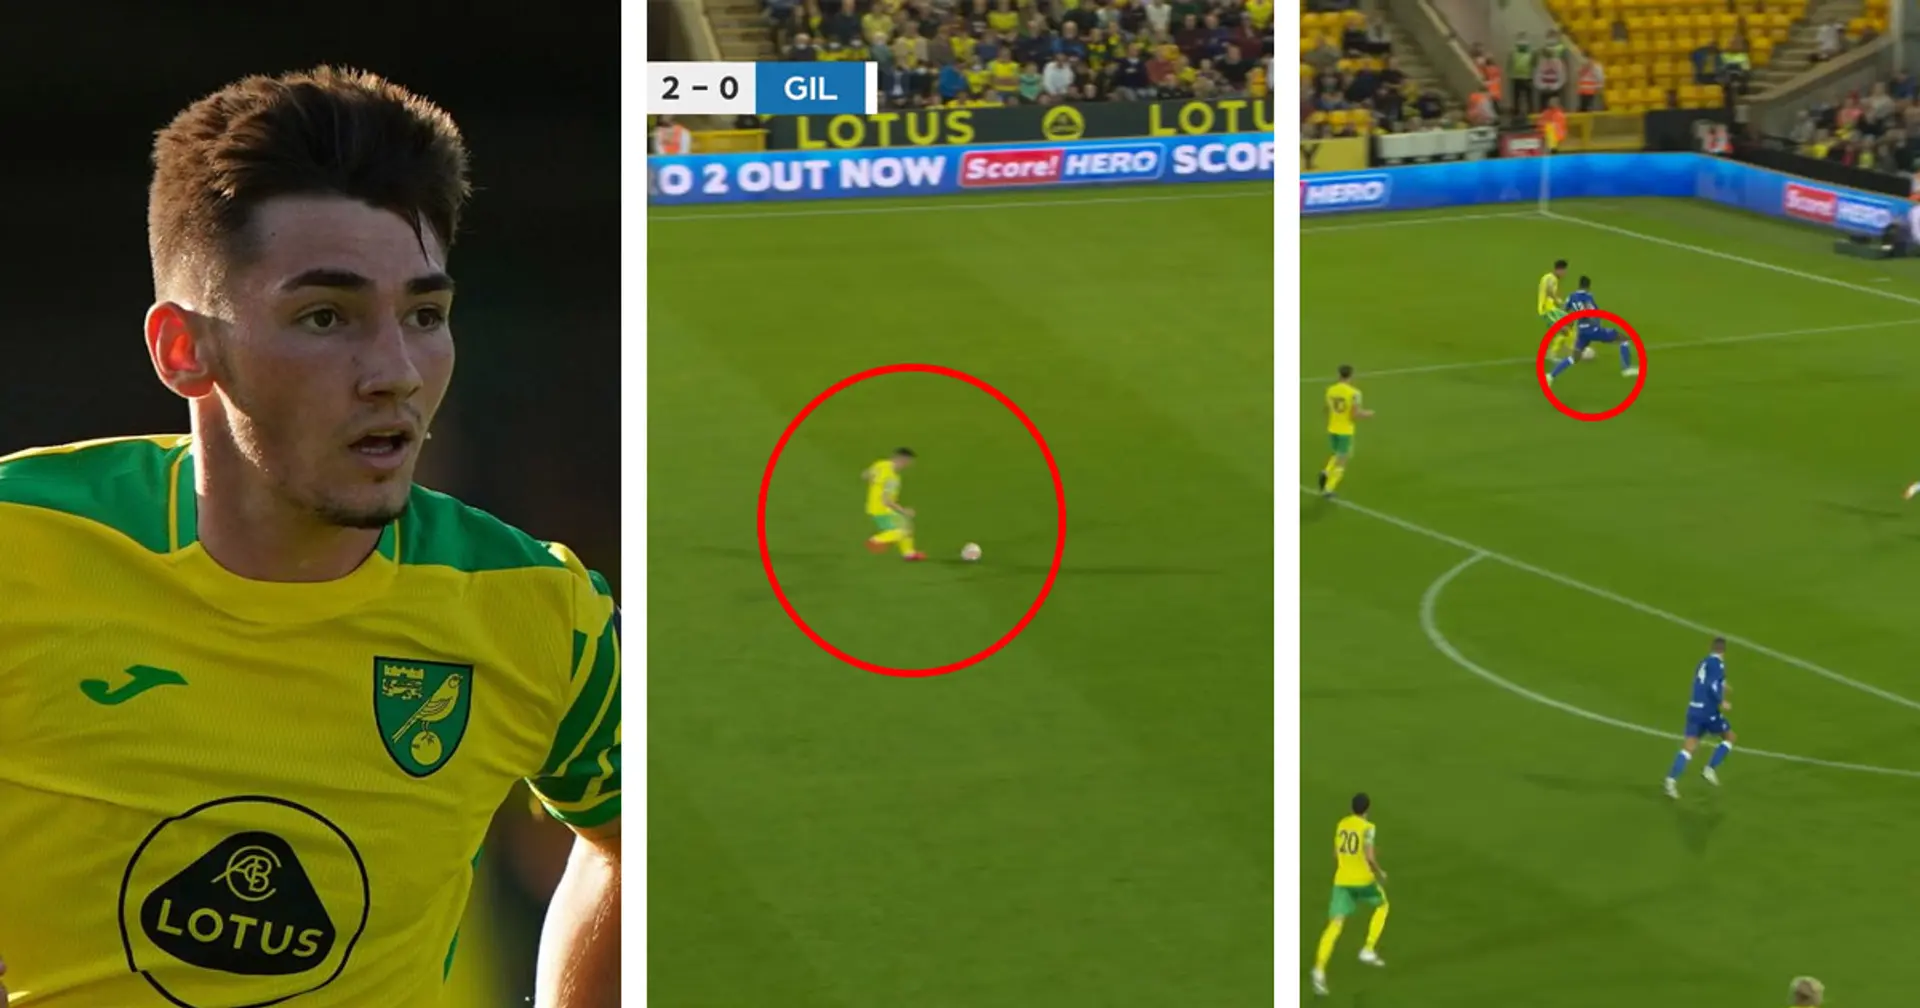 Billy Gilmour sets up Norwich goal with majestic pre-assist: illustrated in 7 pics